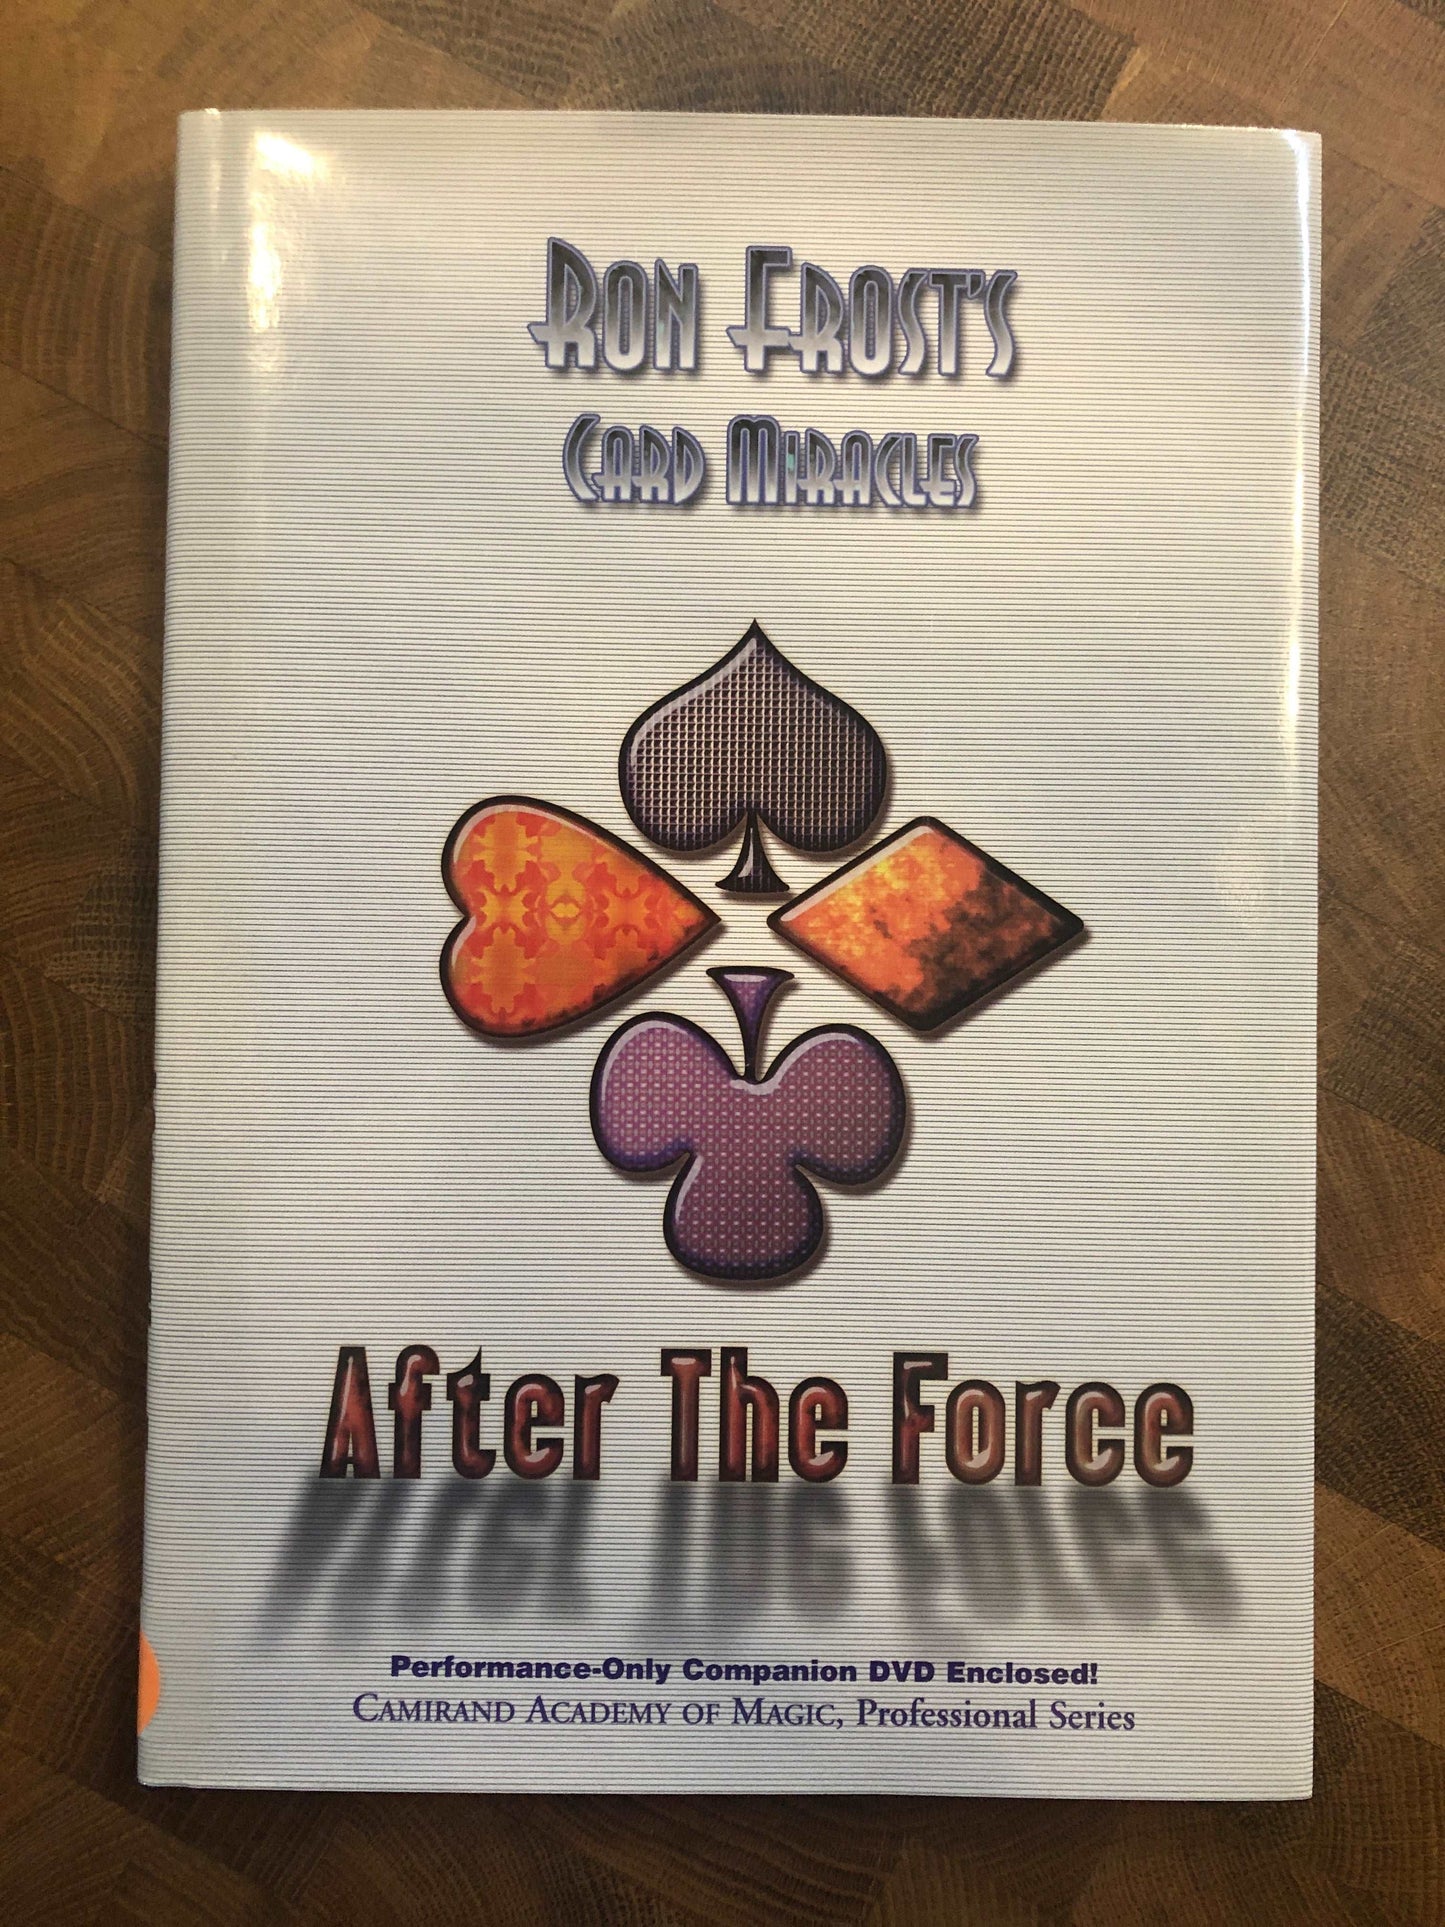 After The Force - Ron Frost's Card Miracles (Book only, no DVD)